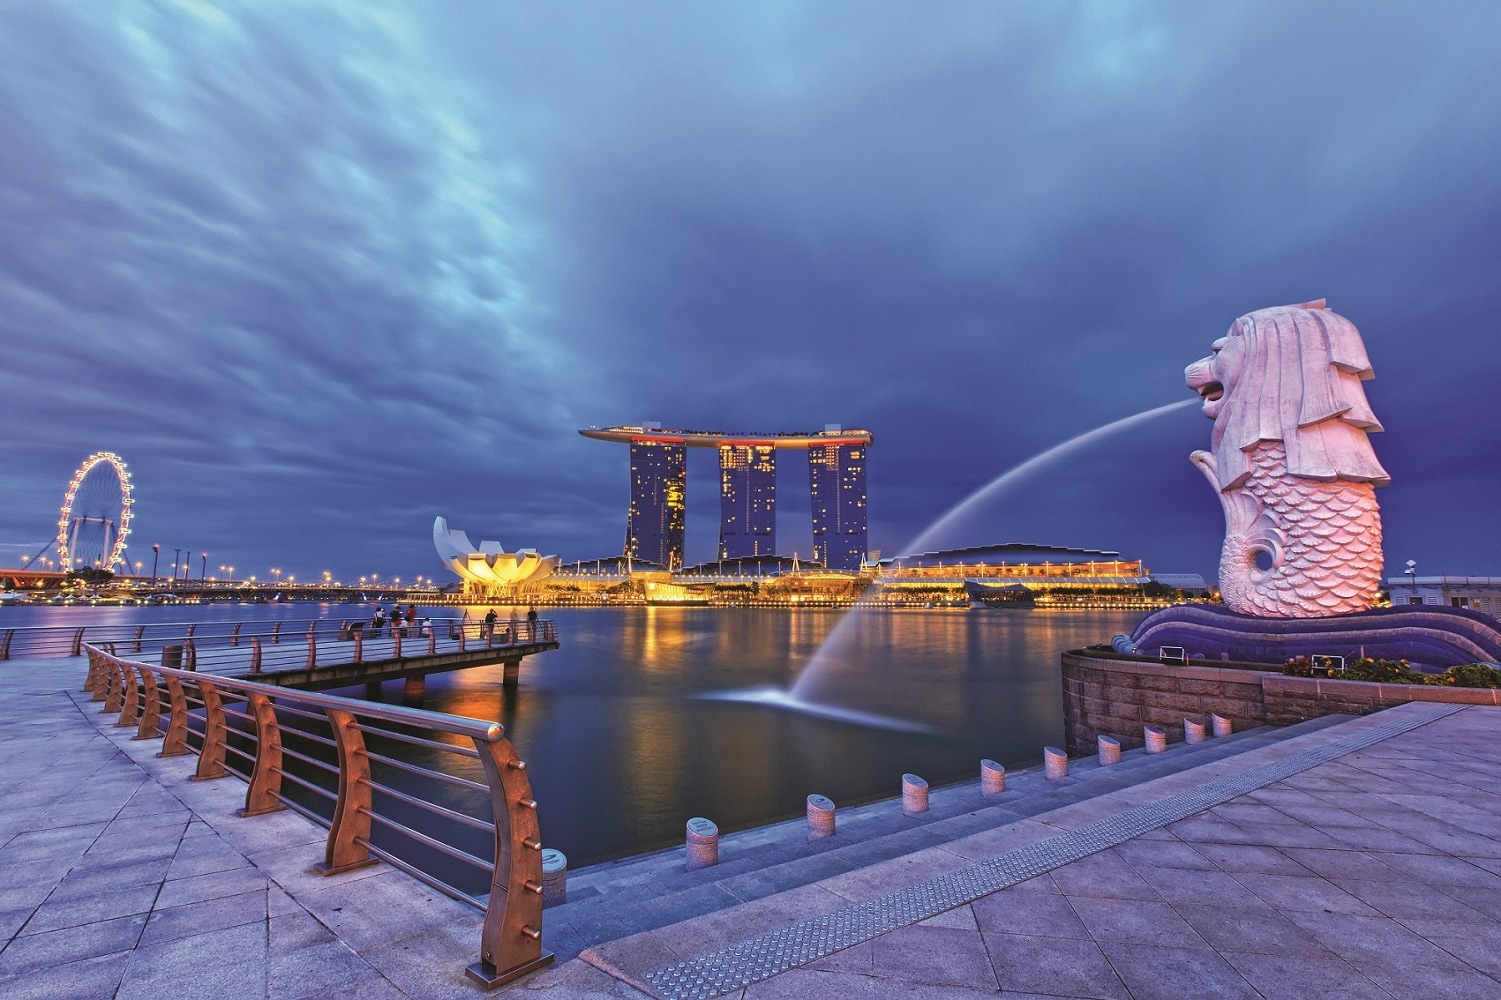 Merlion Statue With Marina Bay Sands And Singapore Flyer Singapore